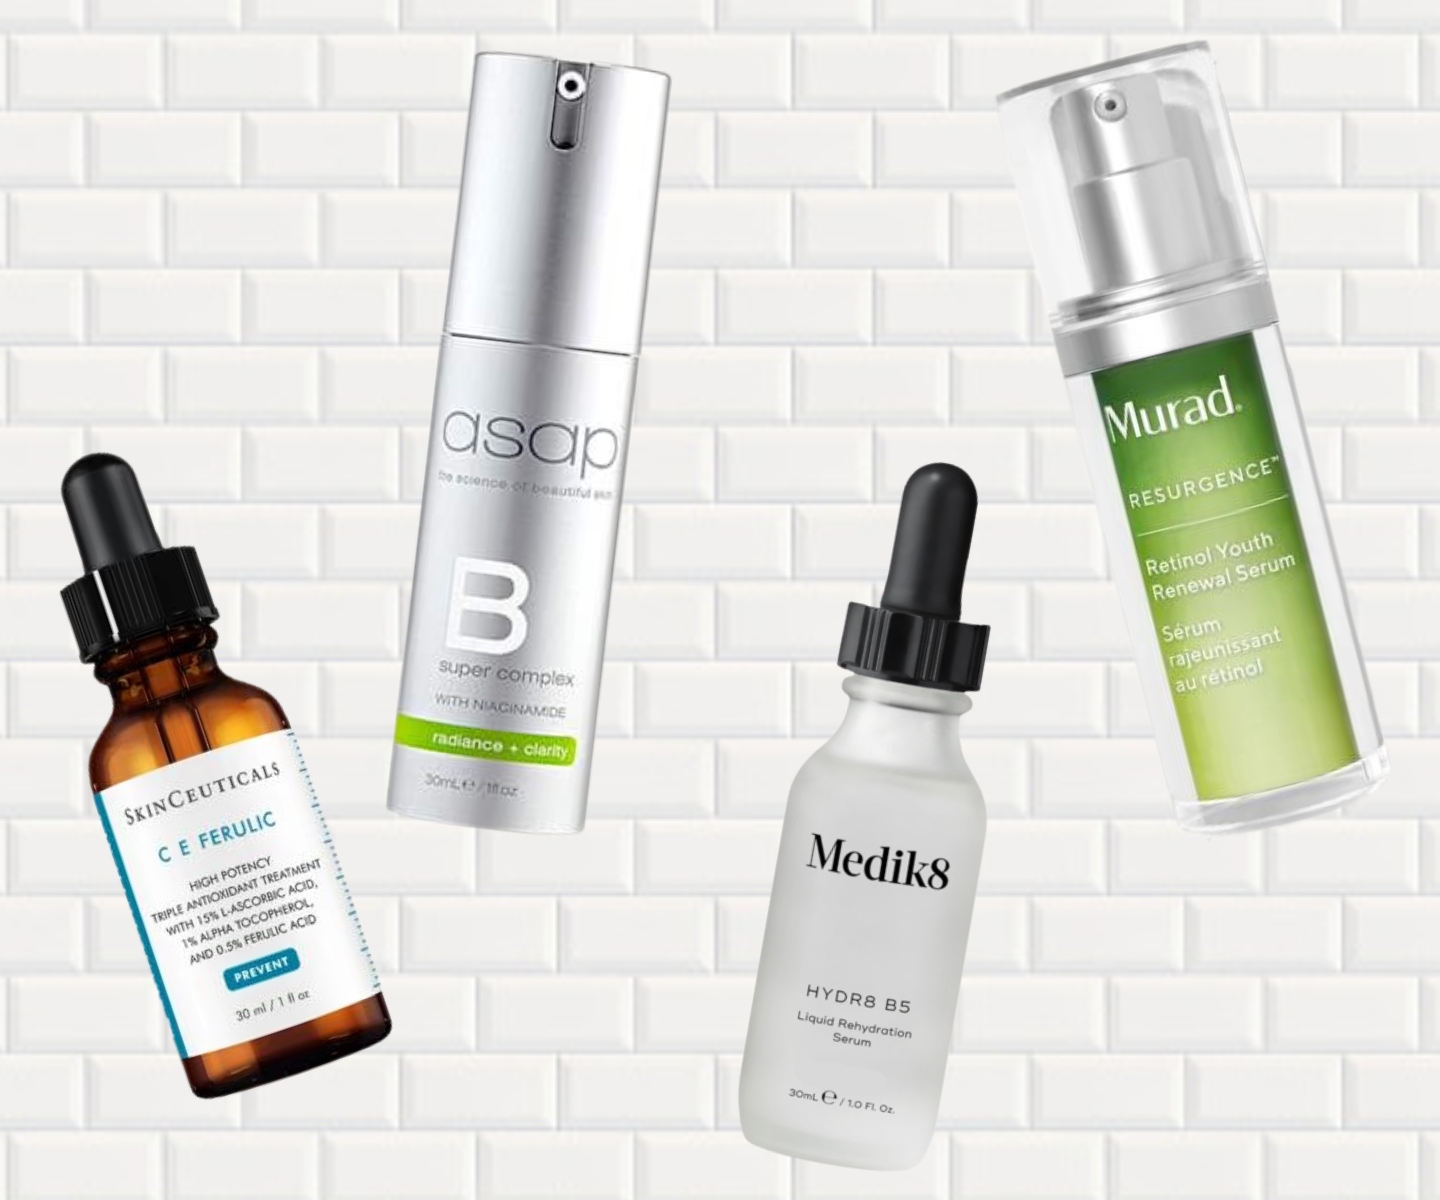 Our 10 Best-Selling Active Serums Adore Beauty in 2022 Were...